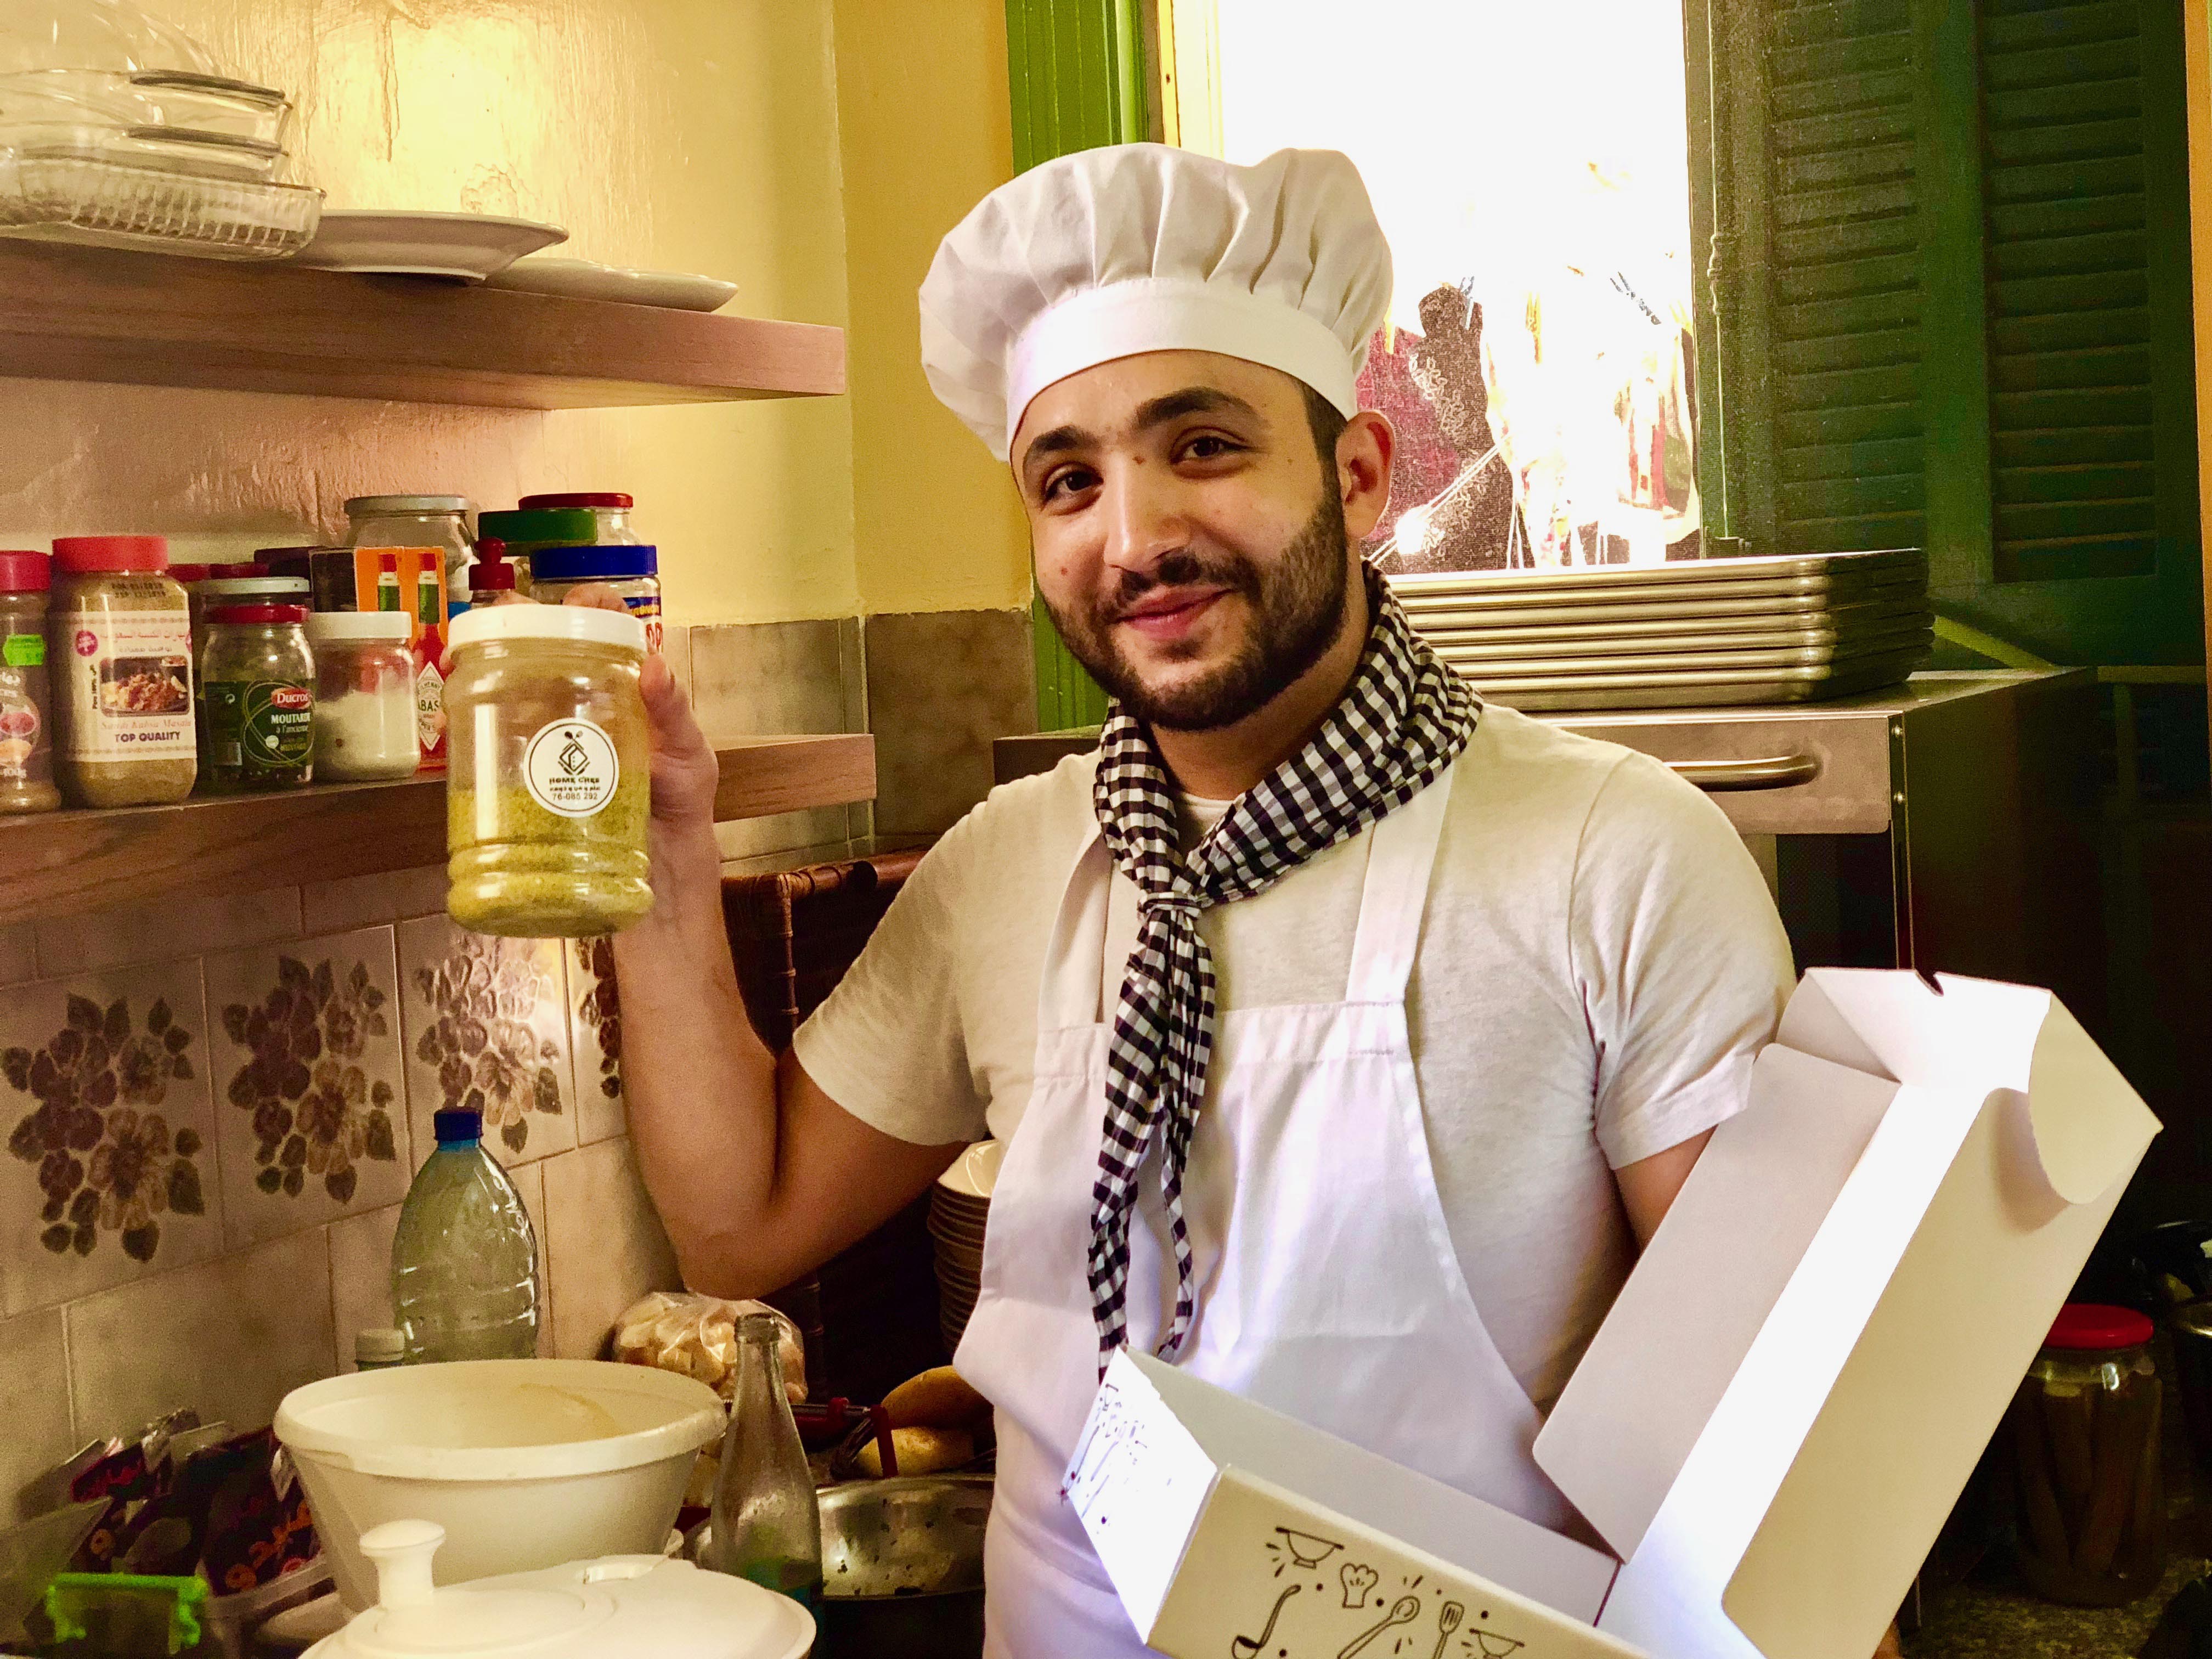 Chef Ahmad smiling, showing us his homemade spices blend and varying his personally designed food packaging box.